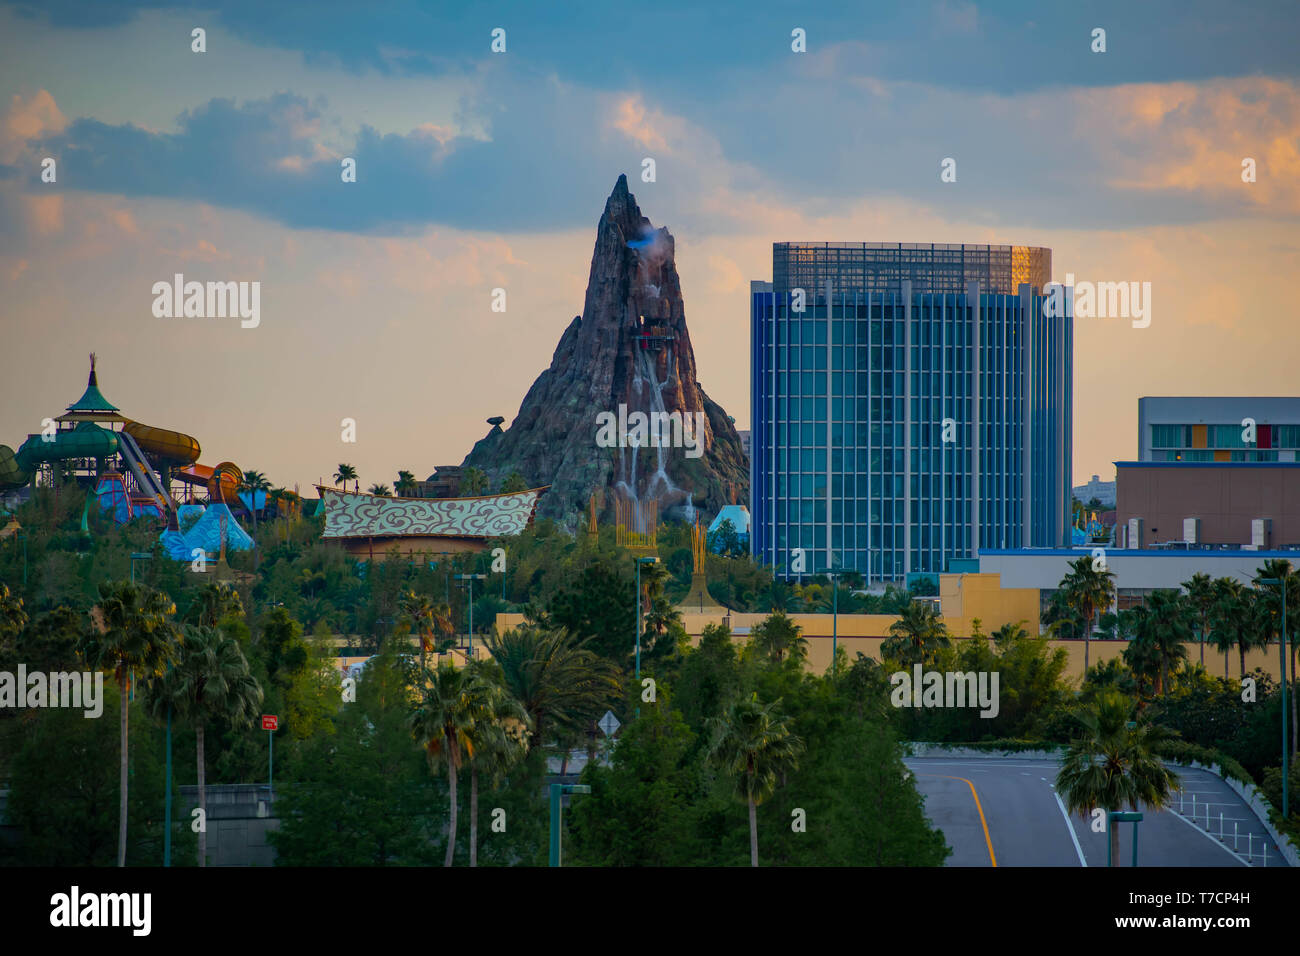 Orlando, Florida. April 18, 2019. Beautiful view of Volcano Bay water park and Aventura Hotel on sunset background at Universal Studios area. Stock Photo